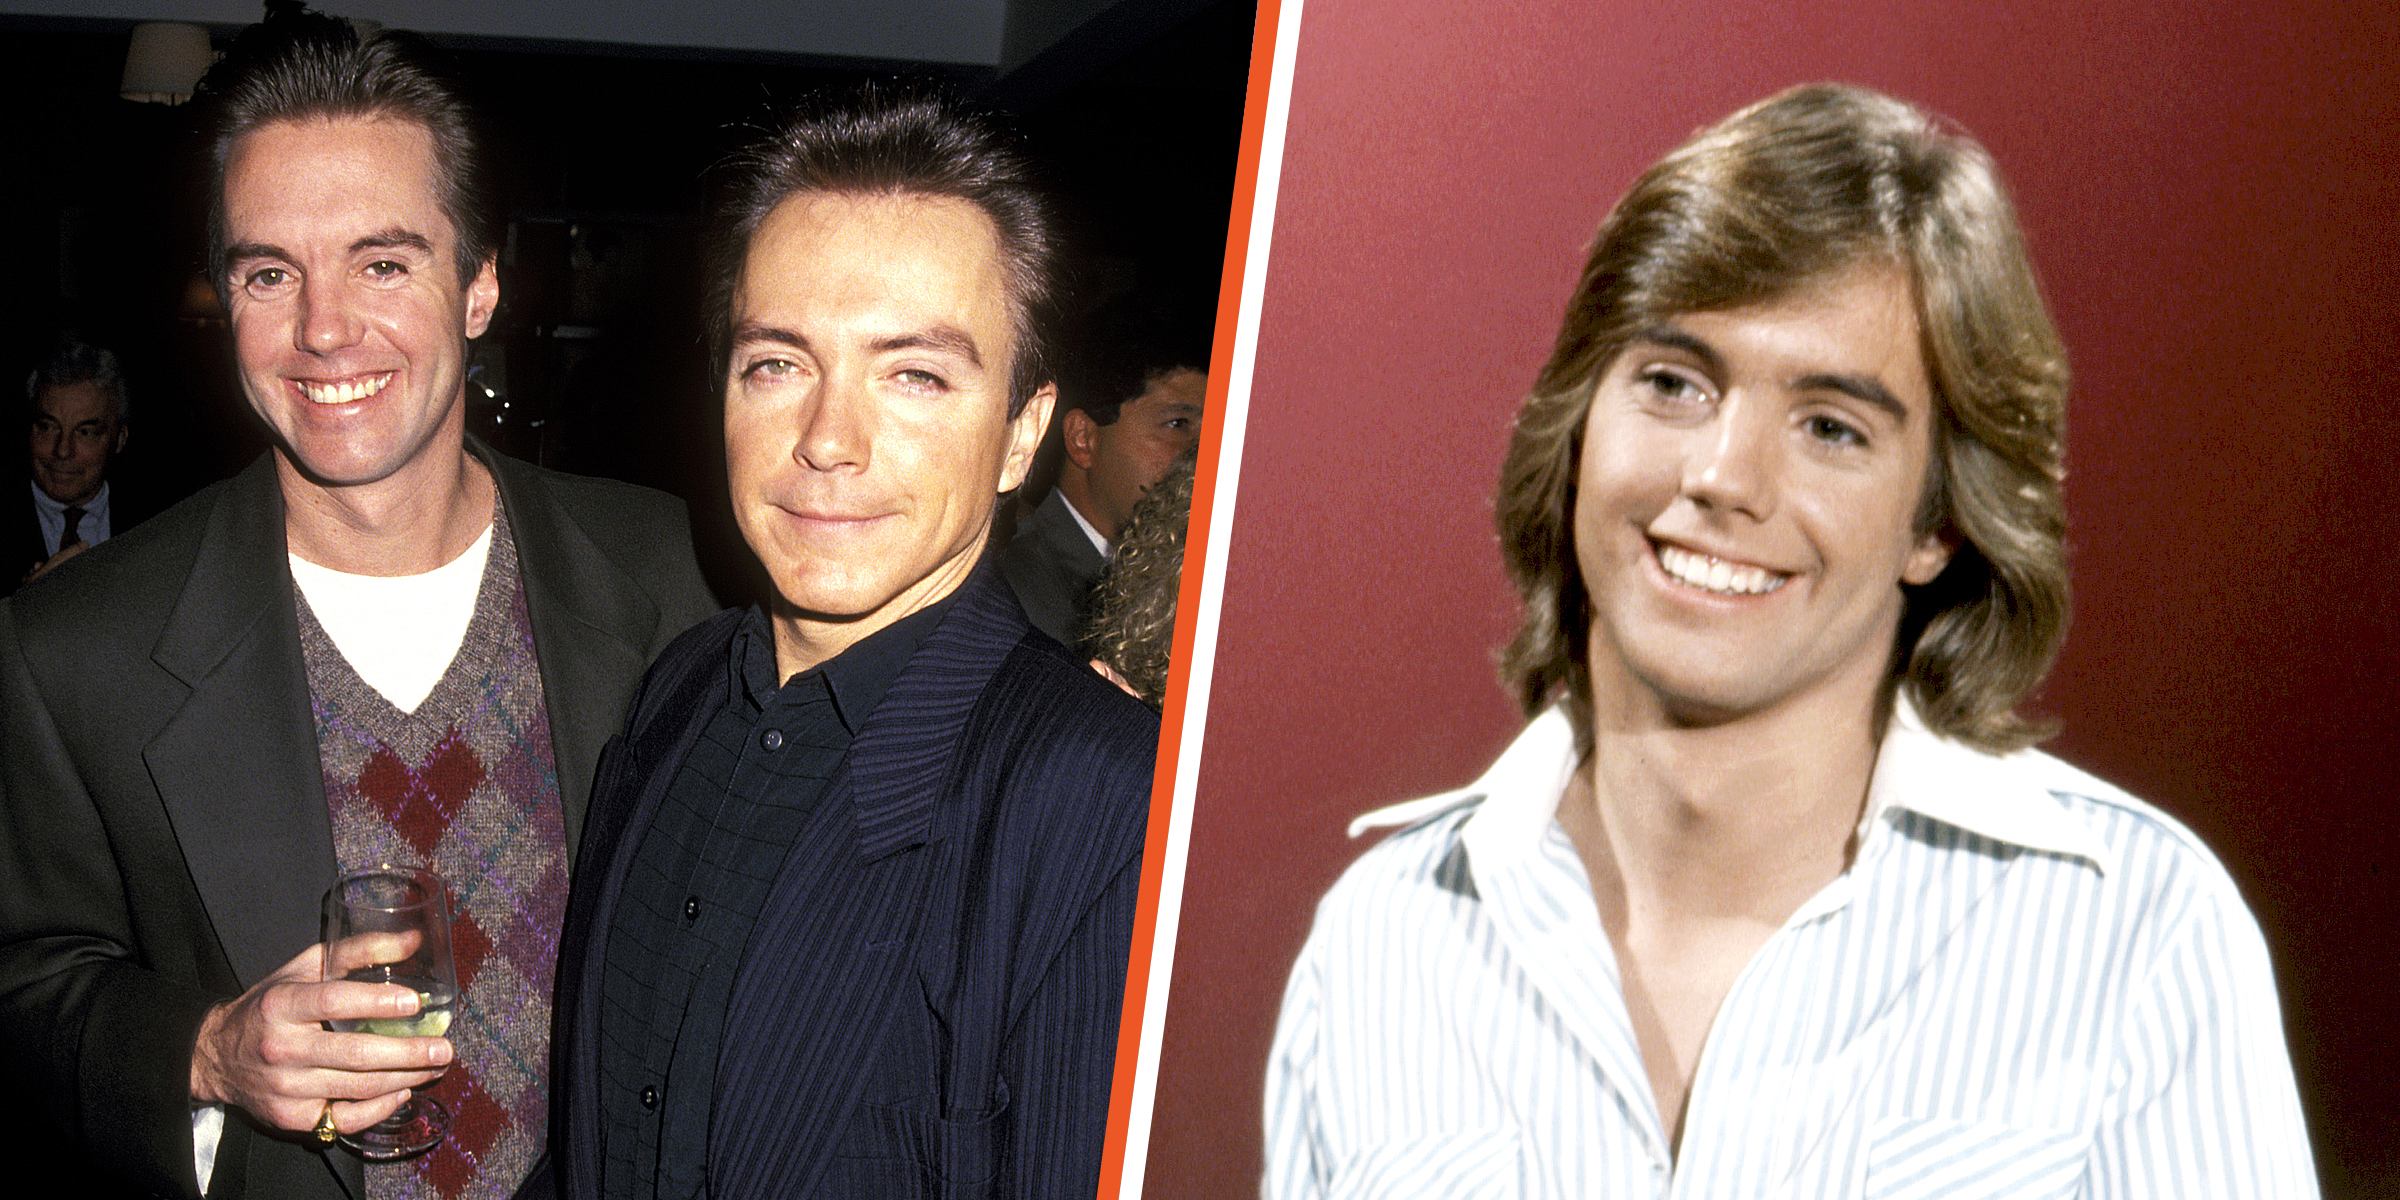 David and Shaun Cassidy | Shaun Cassidy | Source: Getty Images